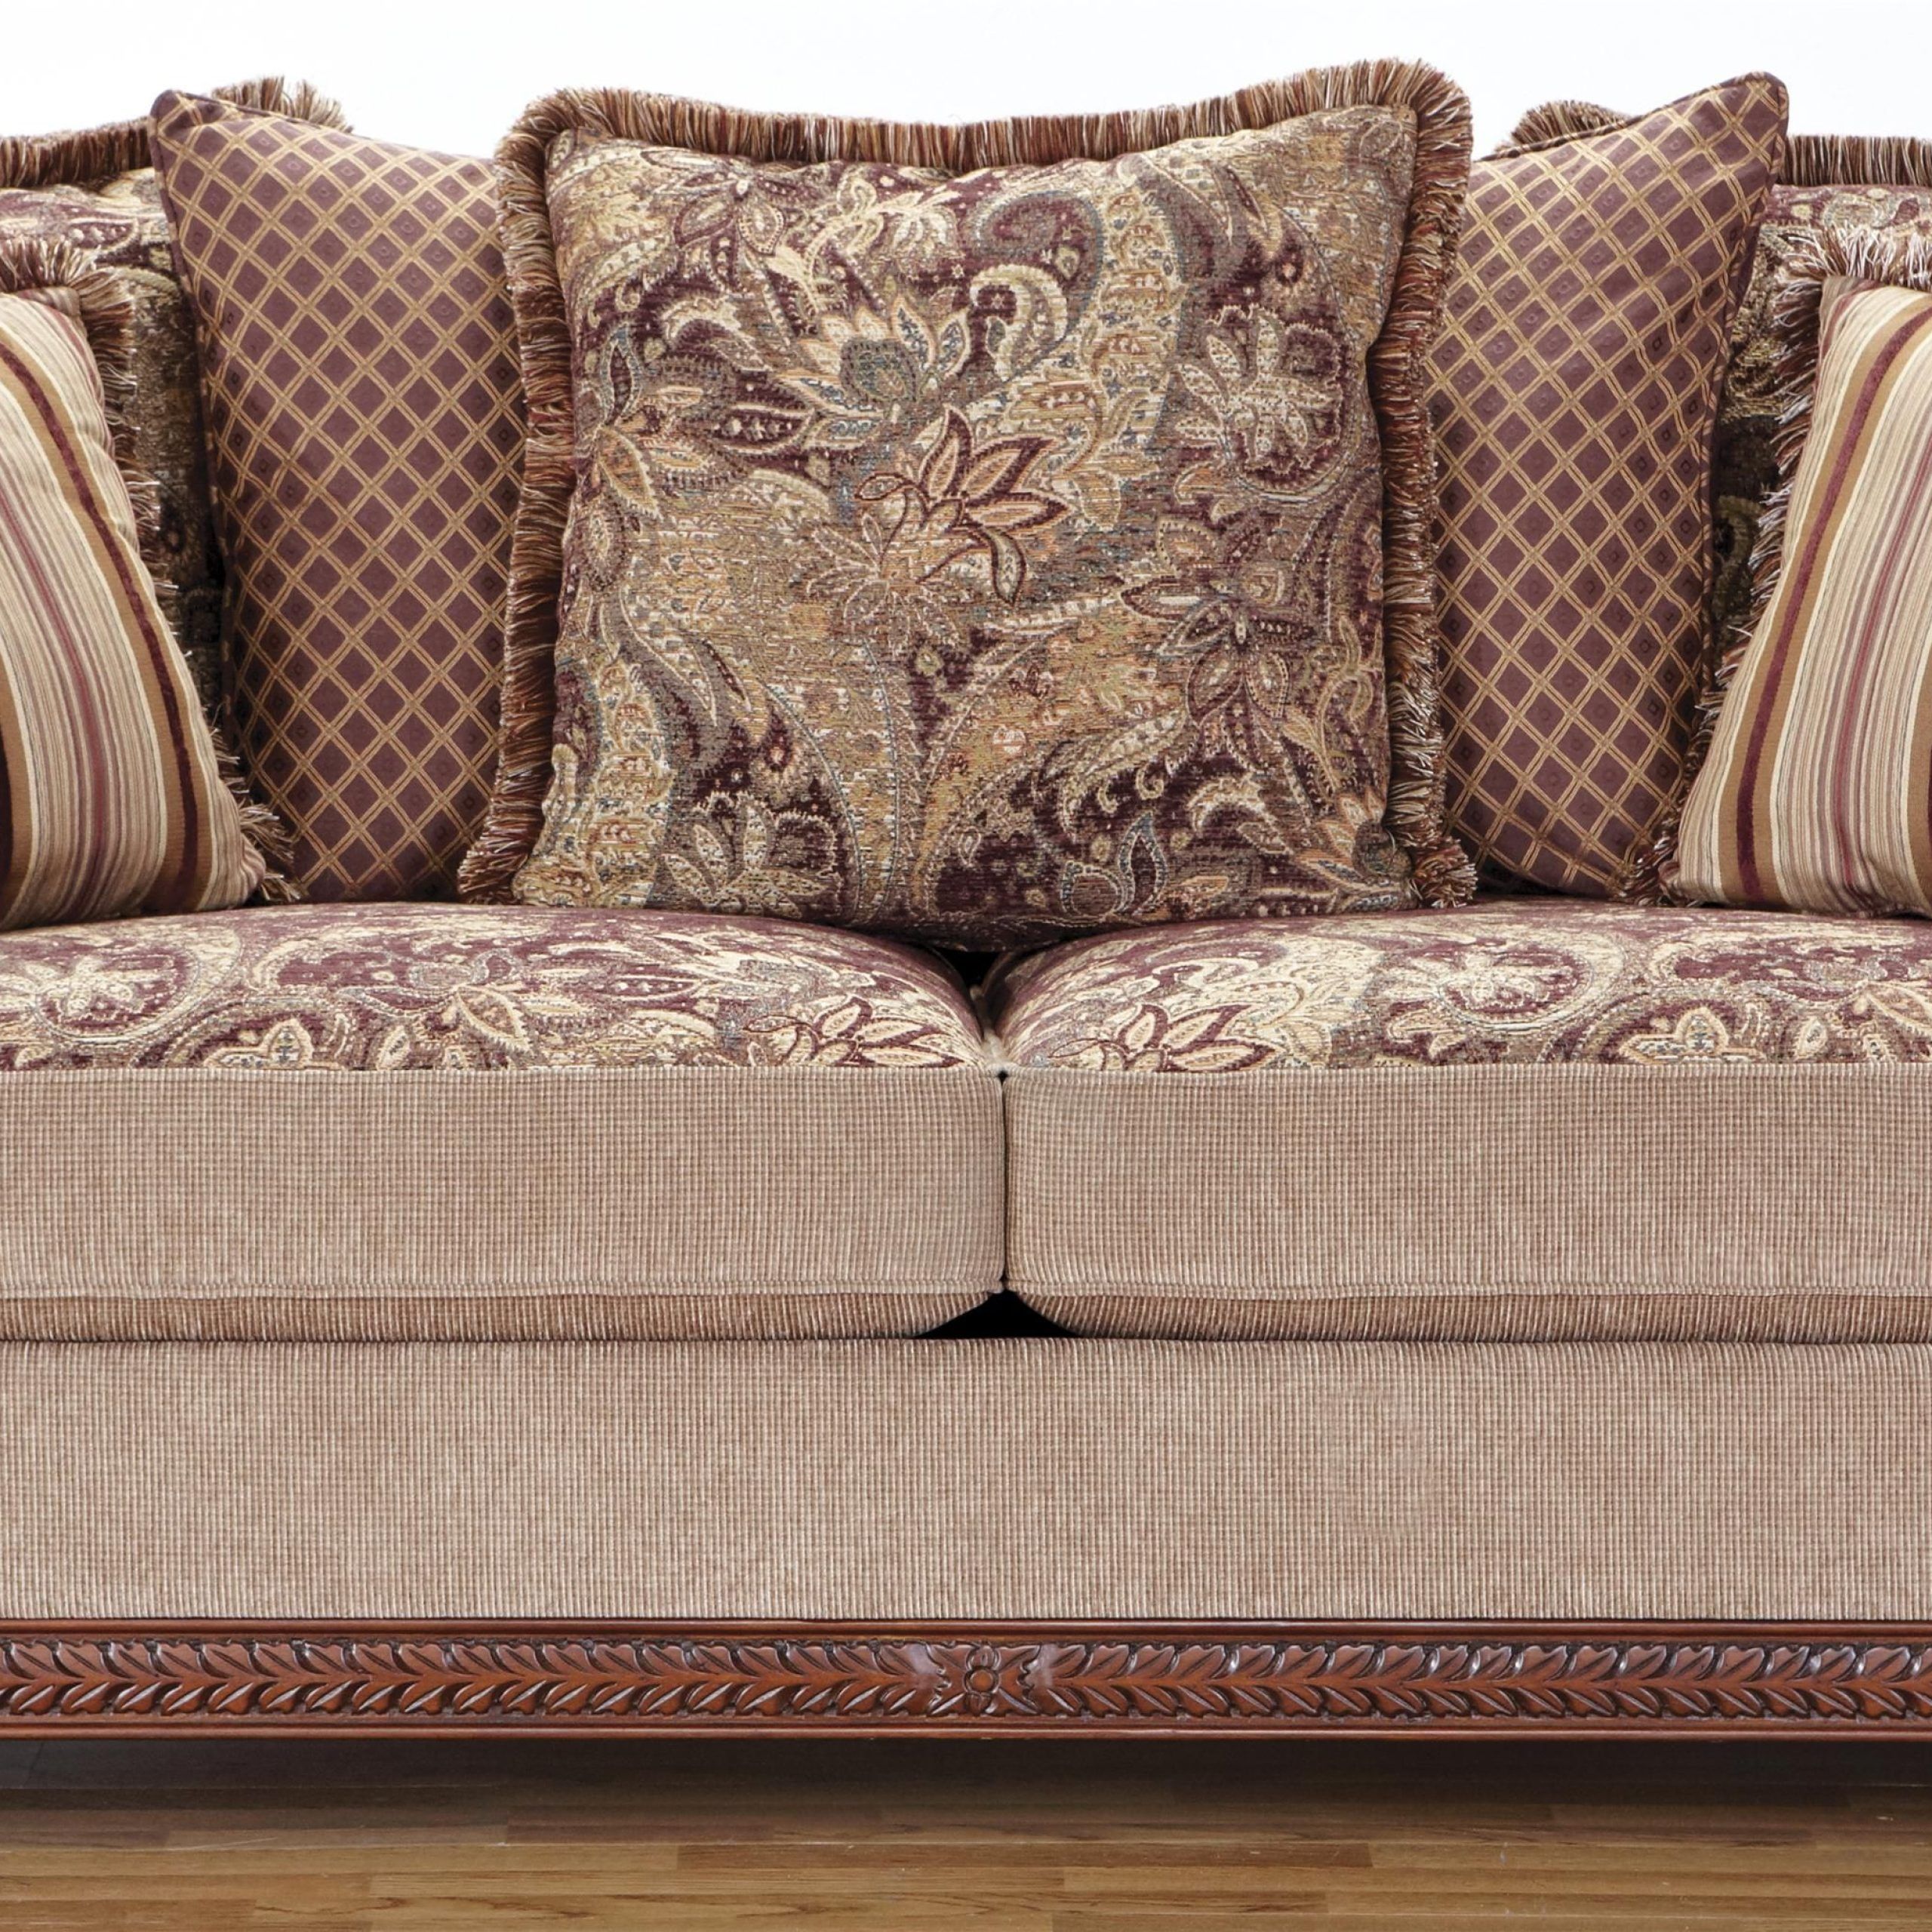 8716 Traditional Rolled Arm Sofa With Decorative Wood Trimhm Within Sofas With Pillowback Wood Bases (View 10 of 20)